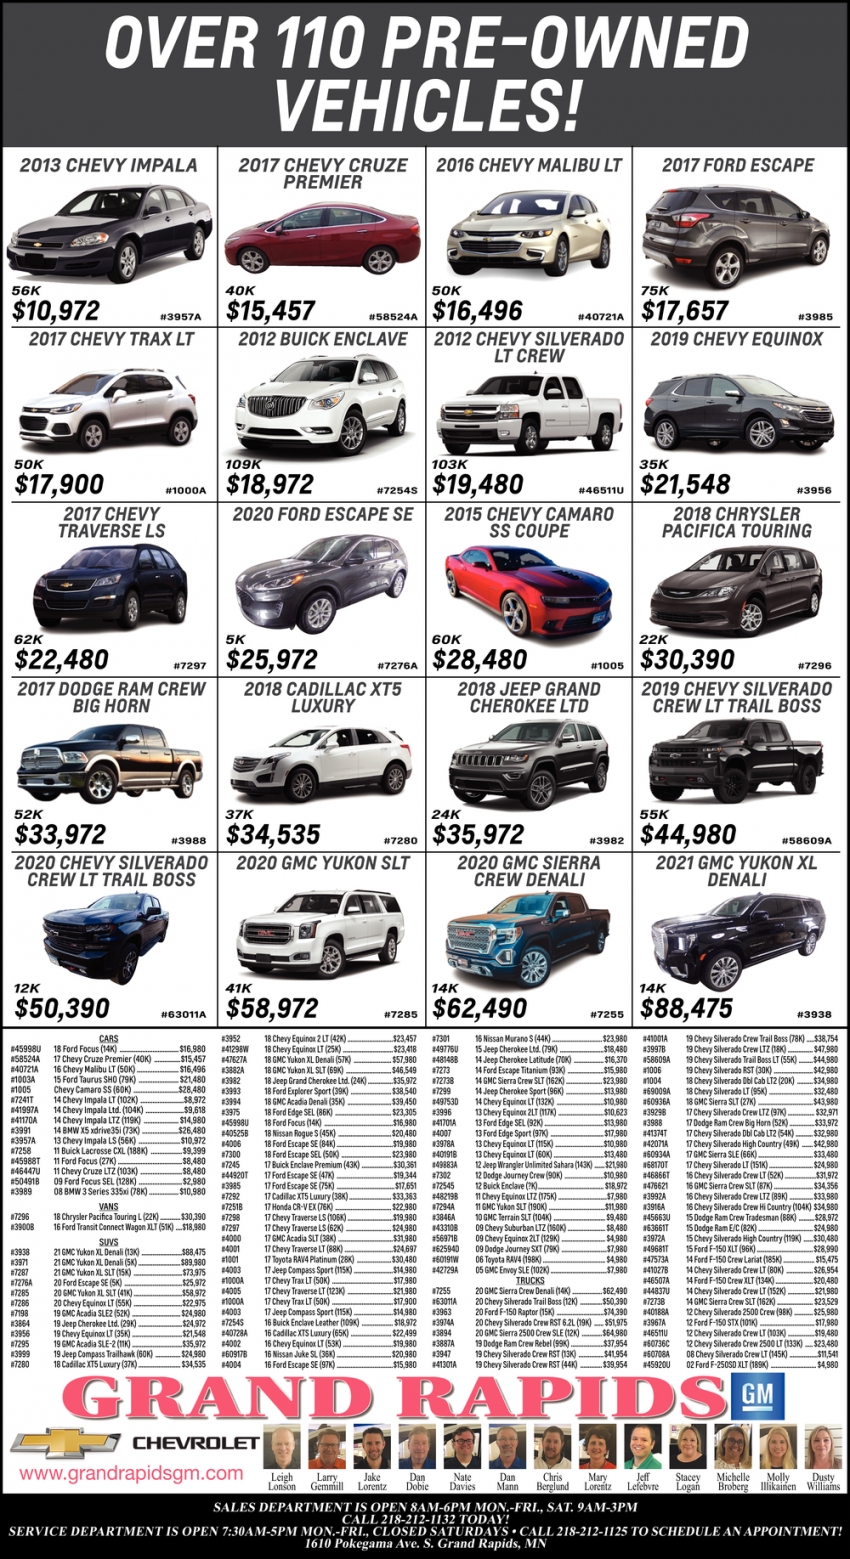 Over 110 Pre-Owned Vehicles!